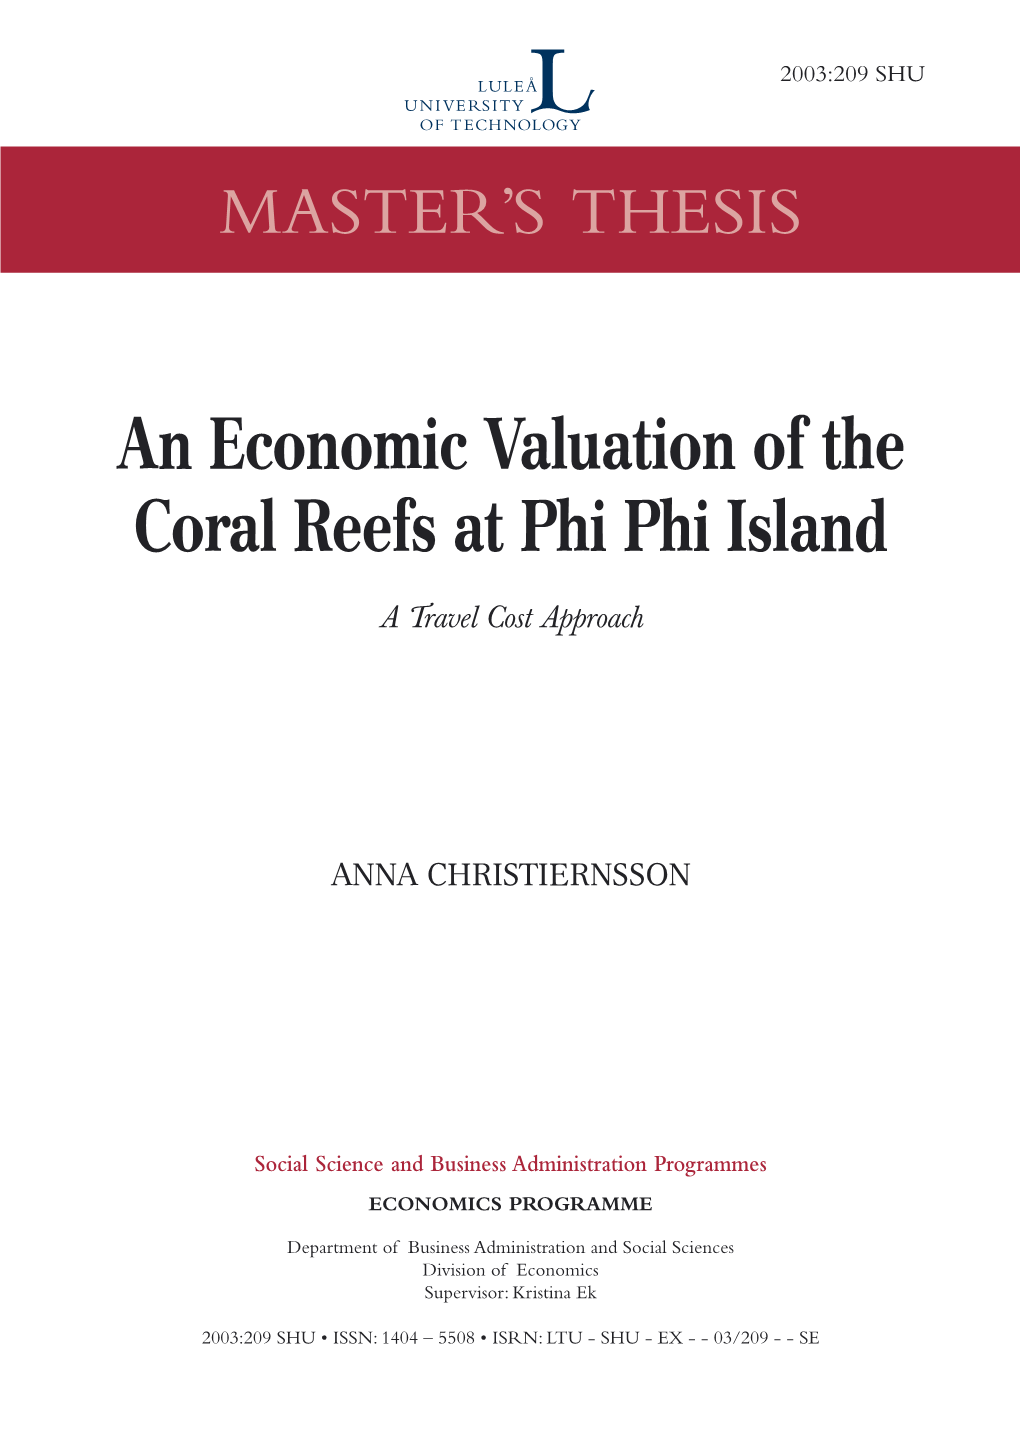 An Economic Valuation of the Coral Reefs at Phi Phi Island